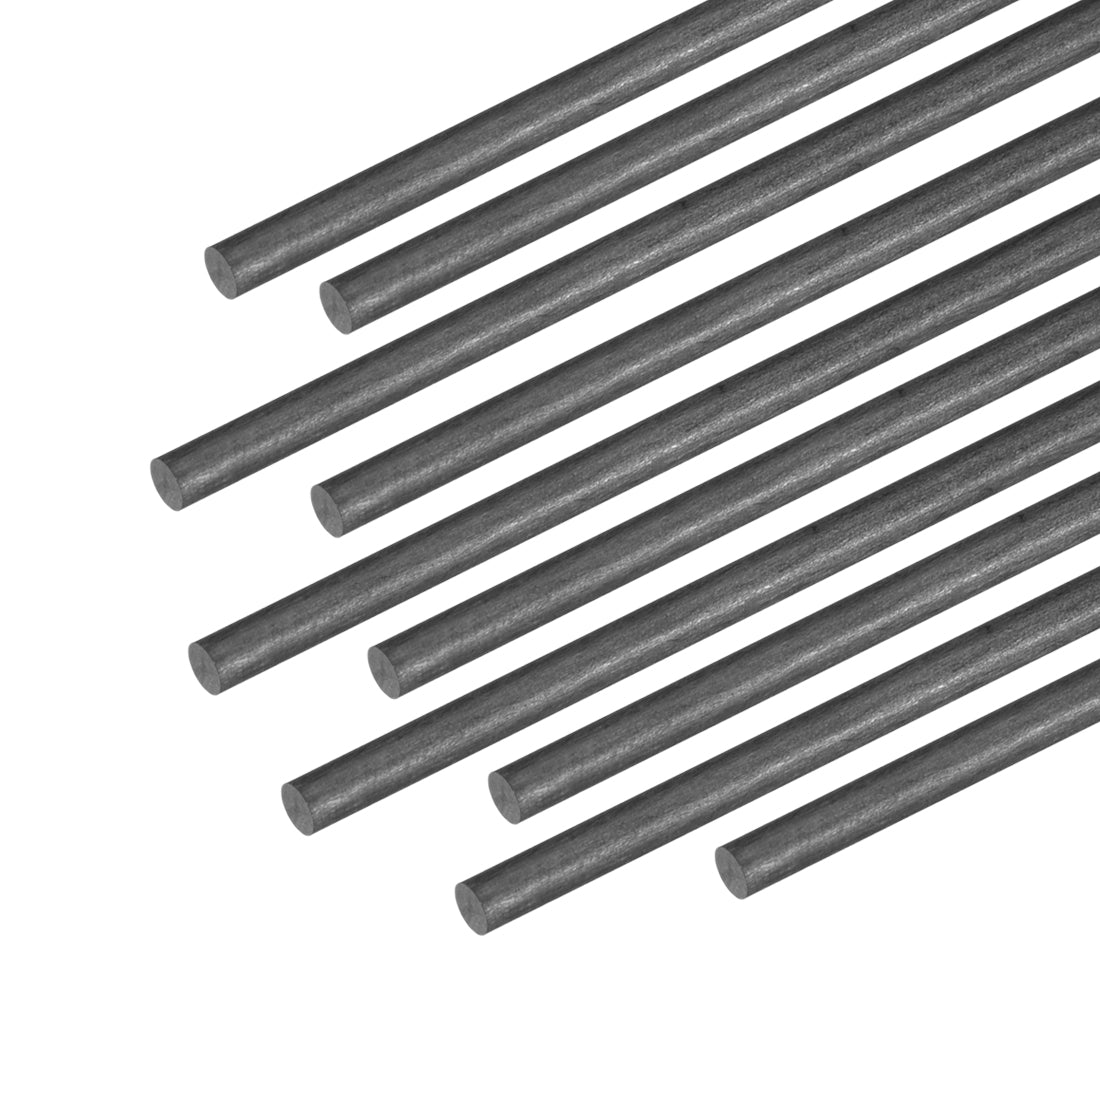 Uxcell Uxcell 3mm Carbon Fiber Rod For RC Airplane Matte Pole US, 200mm 7.8 inch, 10pcs